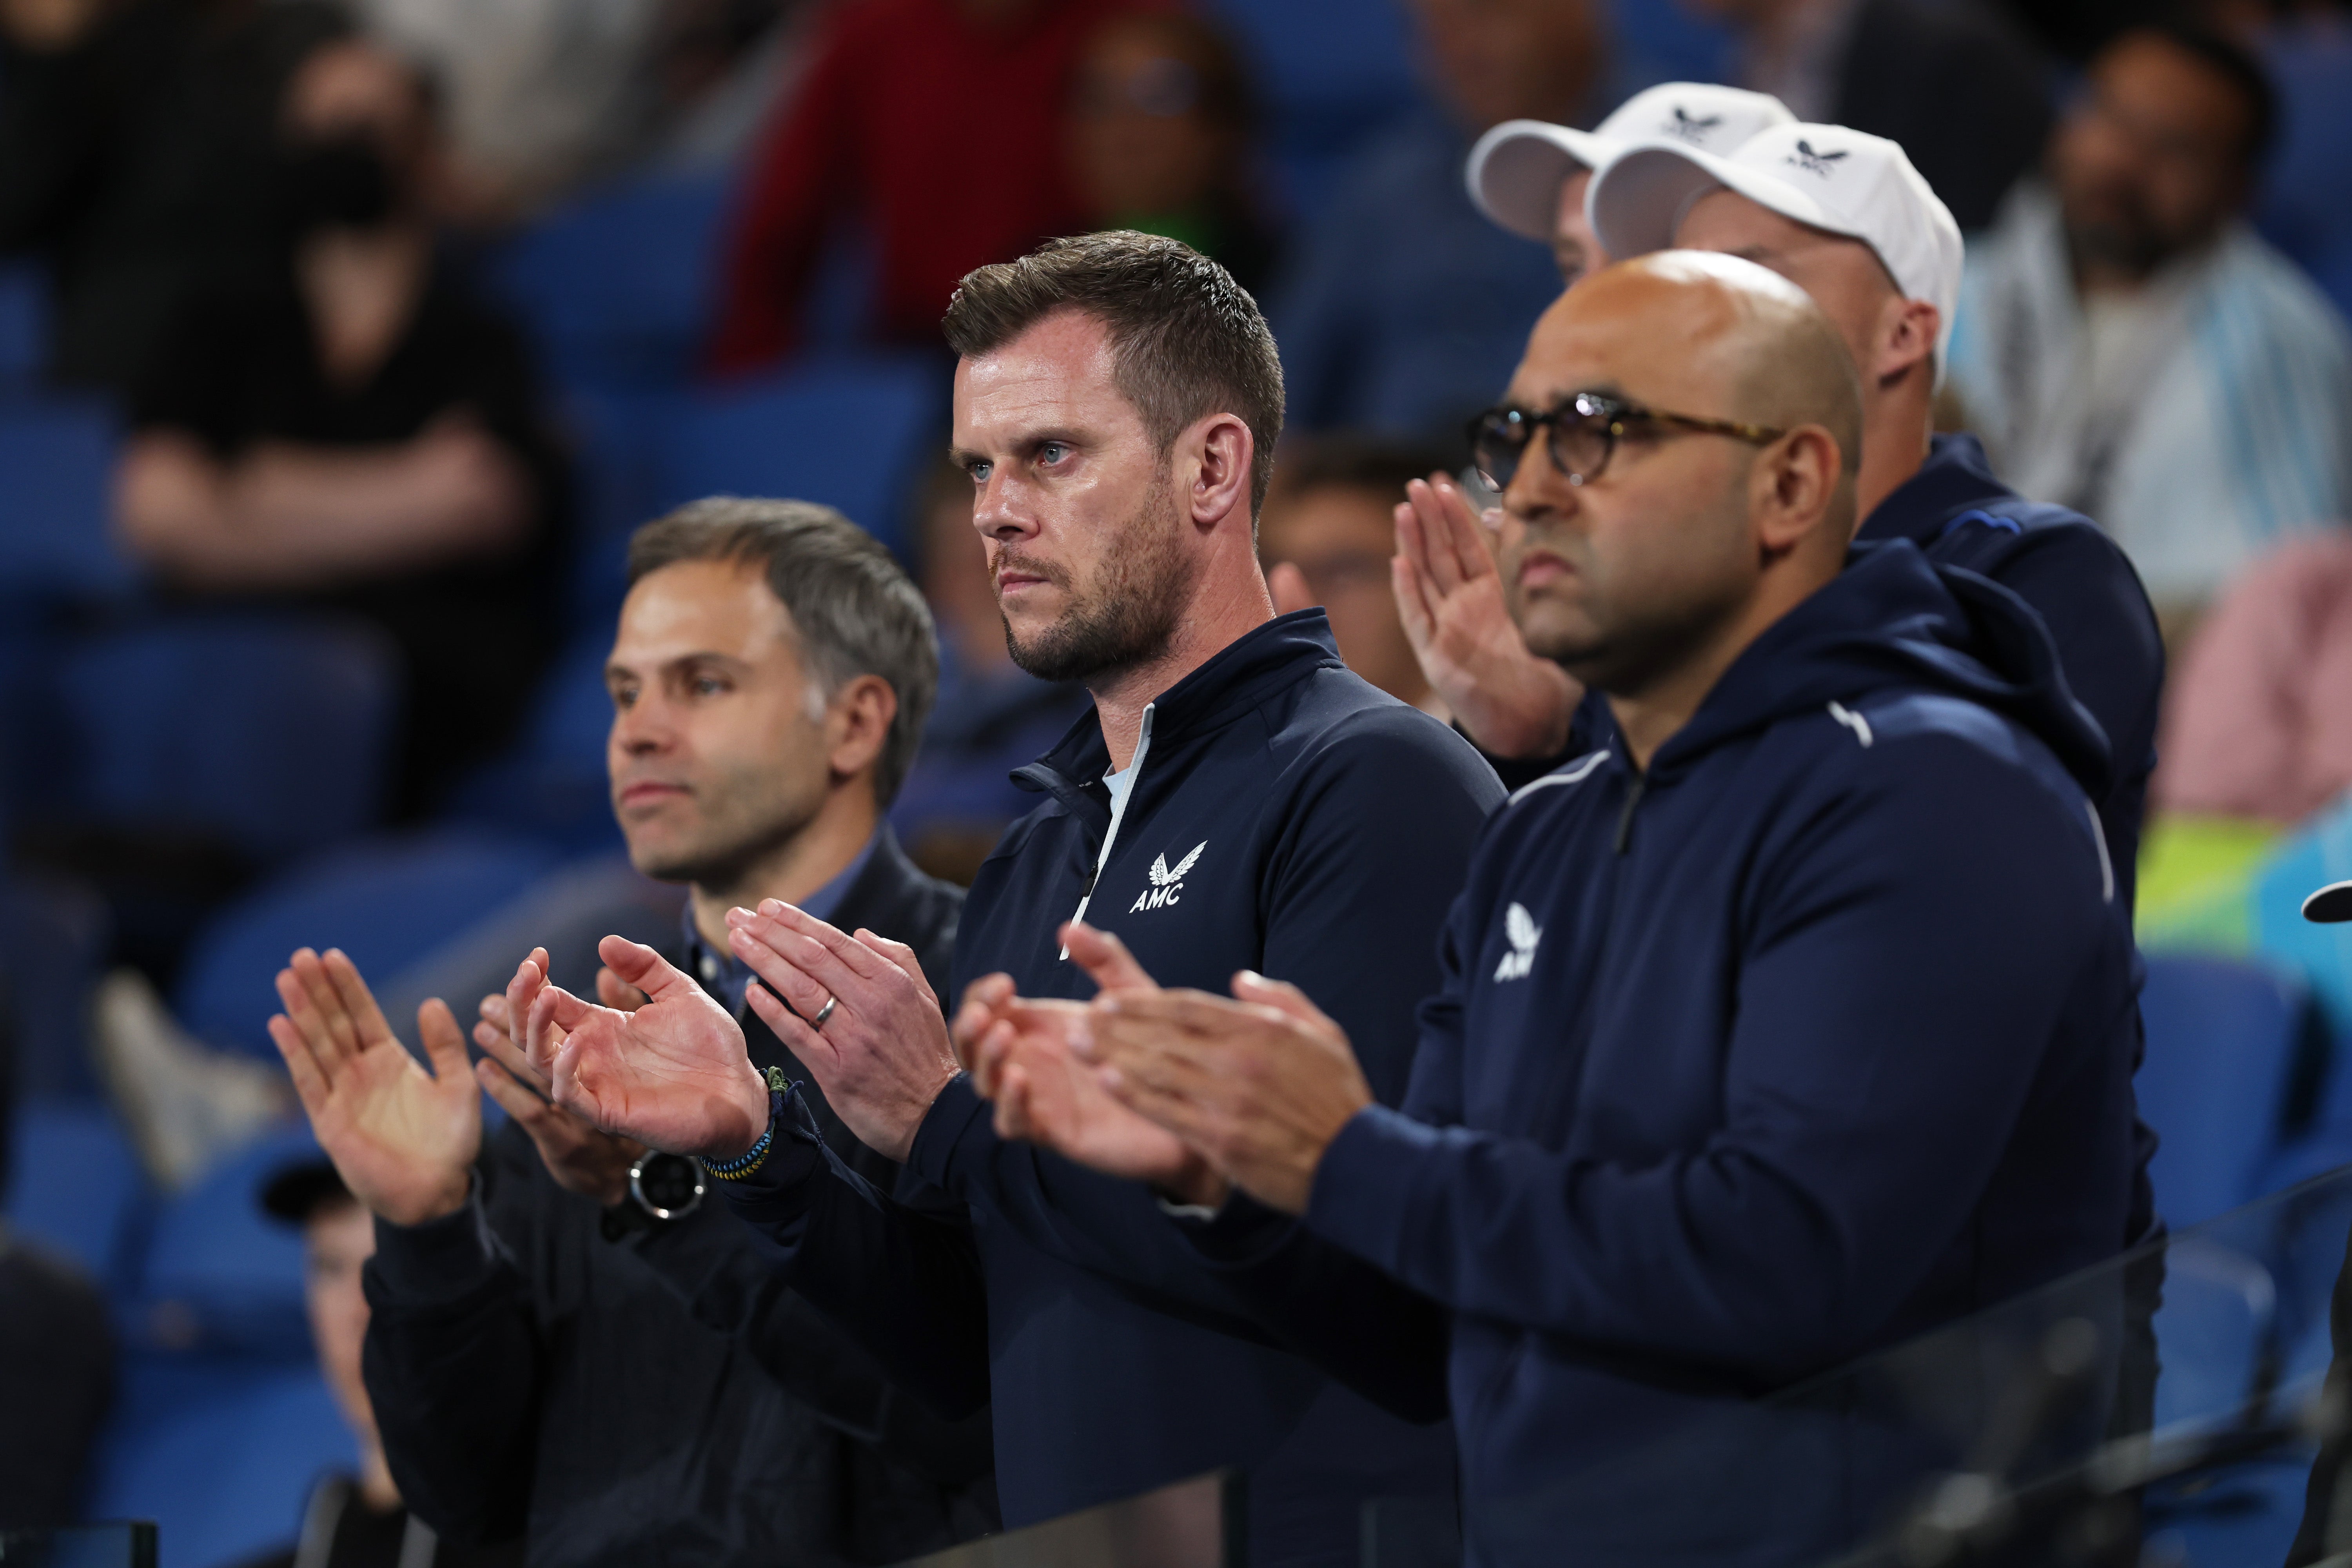 Leon Smith (centre) first coached Murray as a teenager and is now GB’s Davis Cup captain, while Shane Annun (right) is the Scot’s physiotherapist